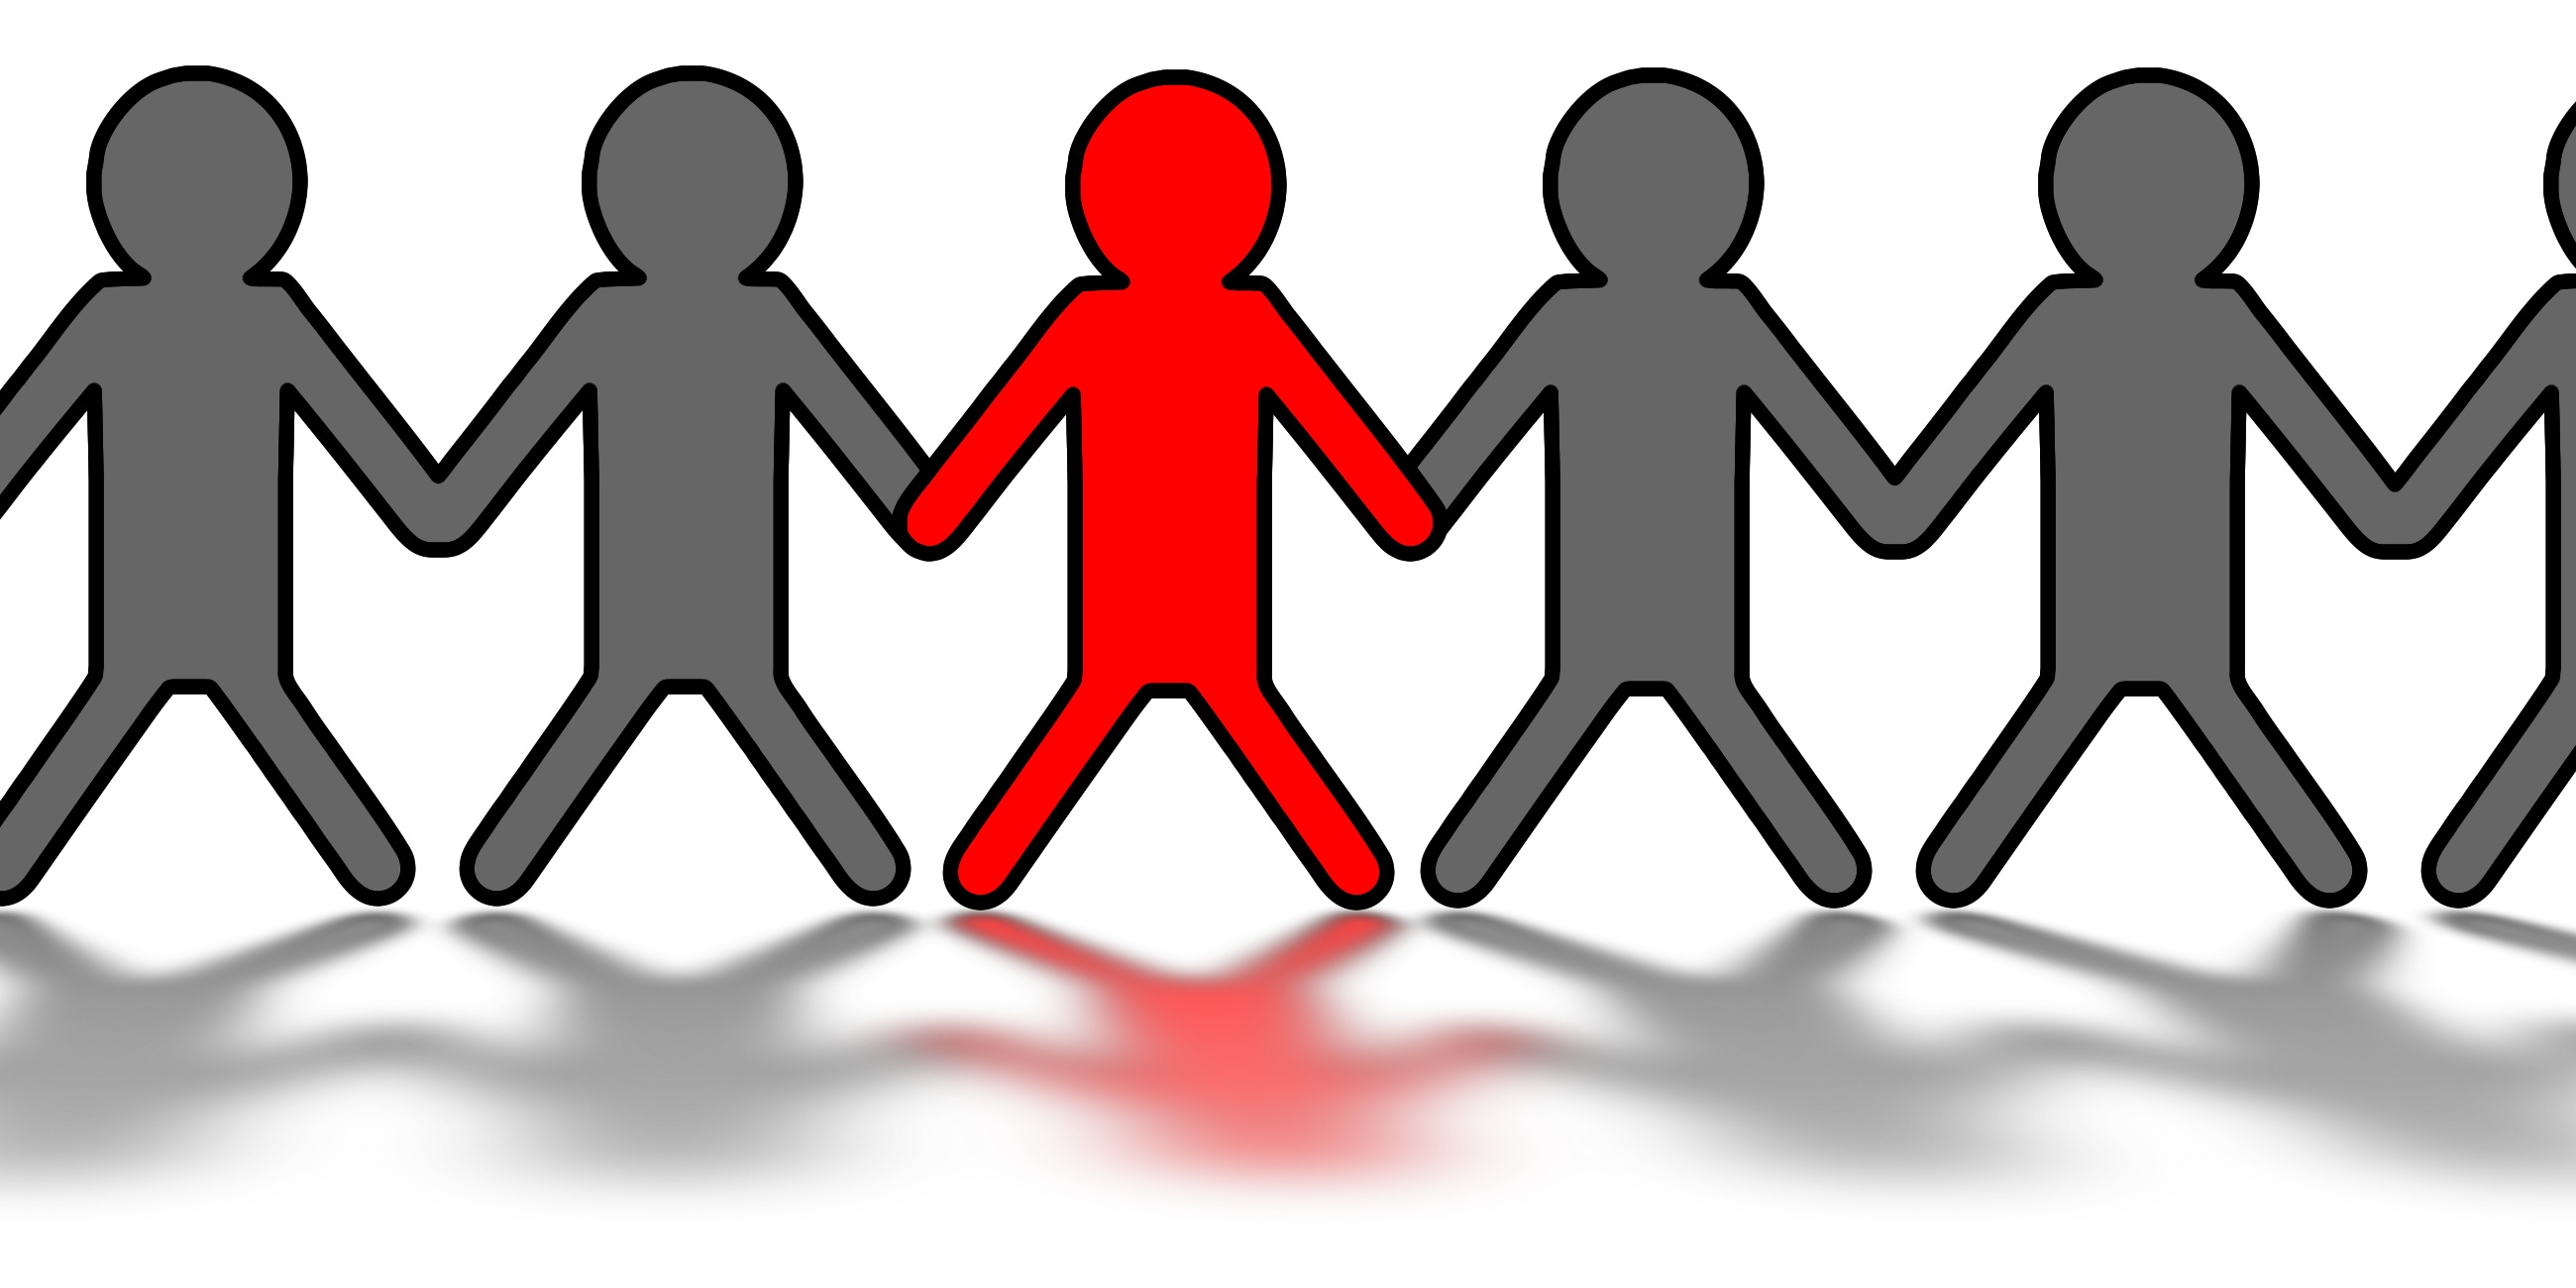 Free download stick people group holding hands clipart - ClipartFox